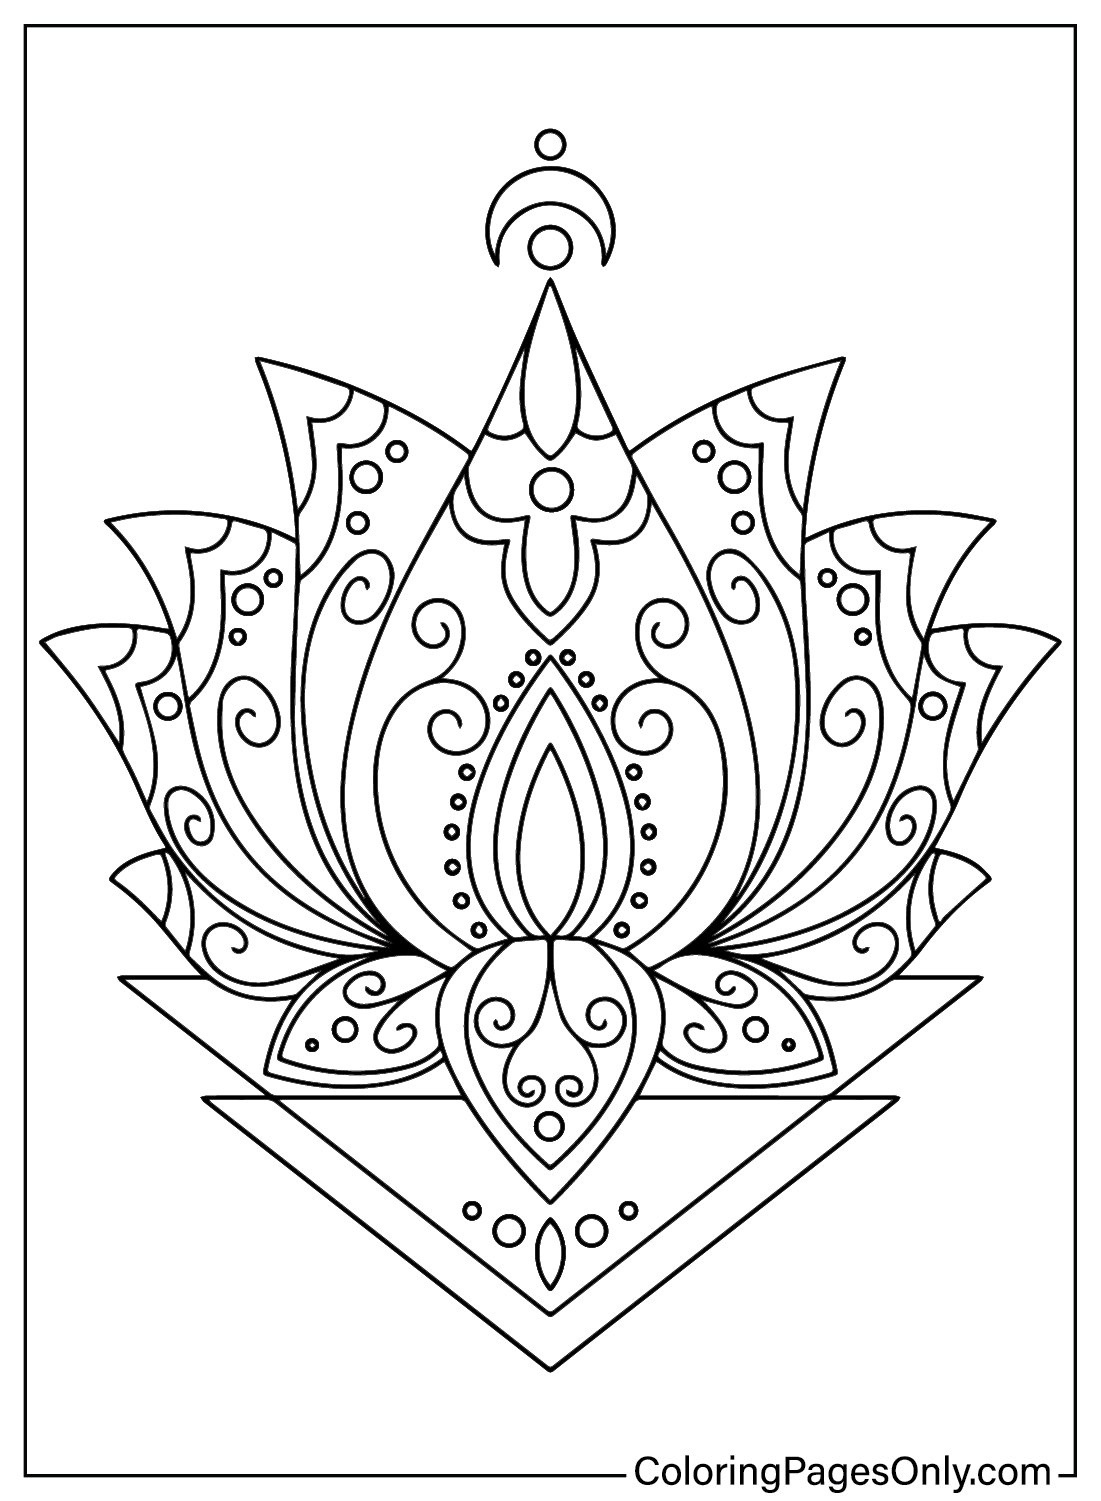 Coloring pages only on x rangoli is not just an art form its a celebration of diversity and creativity httpstcounlwxsp rangoli coloringpagesonly coloringpages coloringbook art fanart sketch drawing draw coloring usa trend